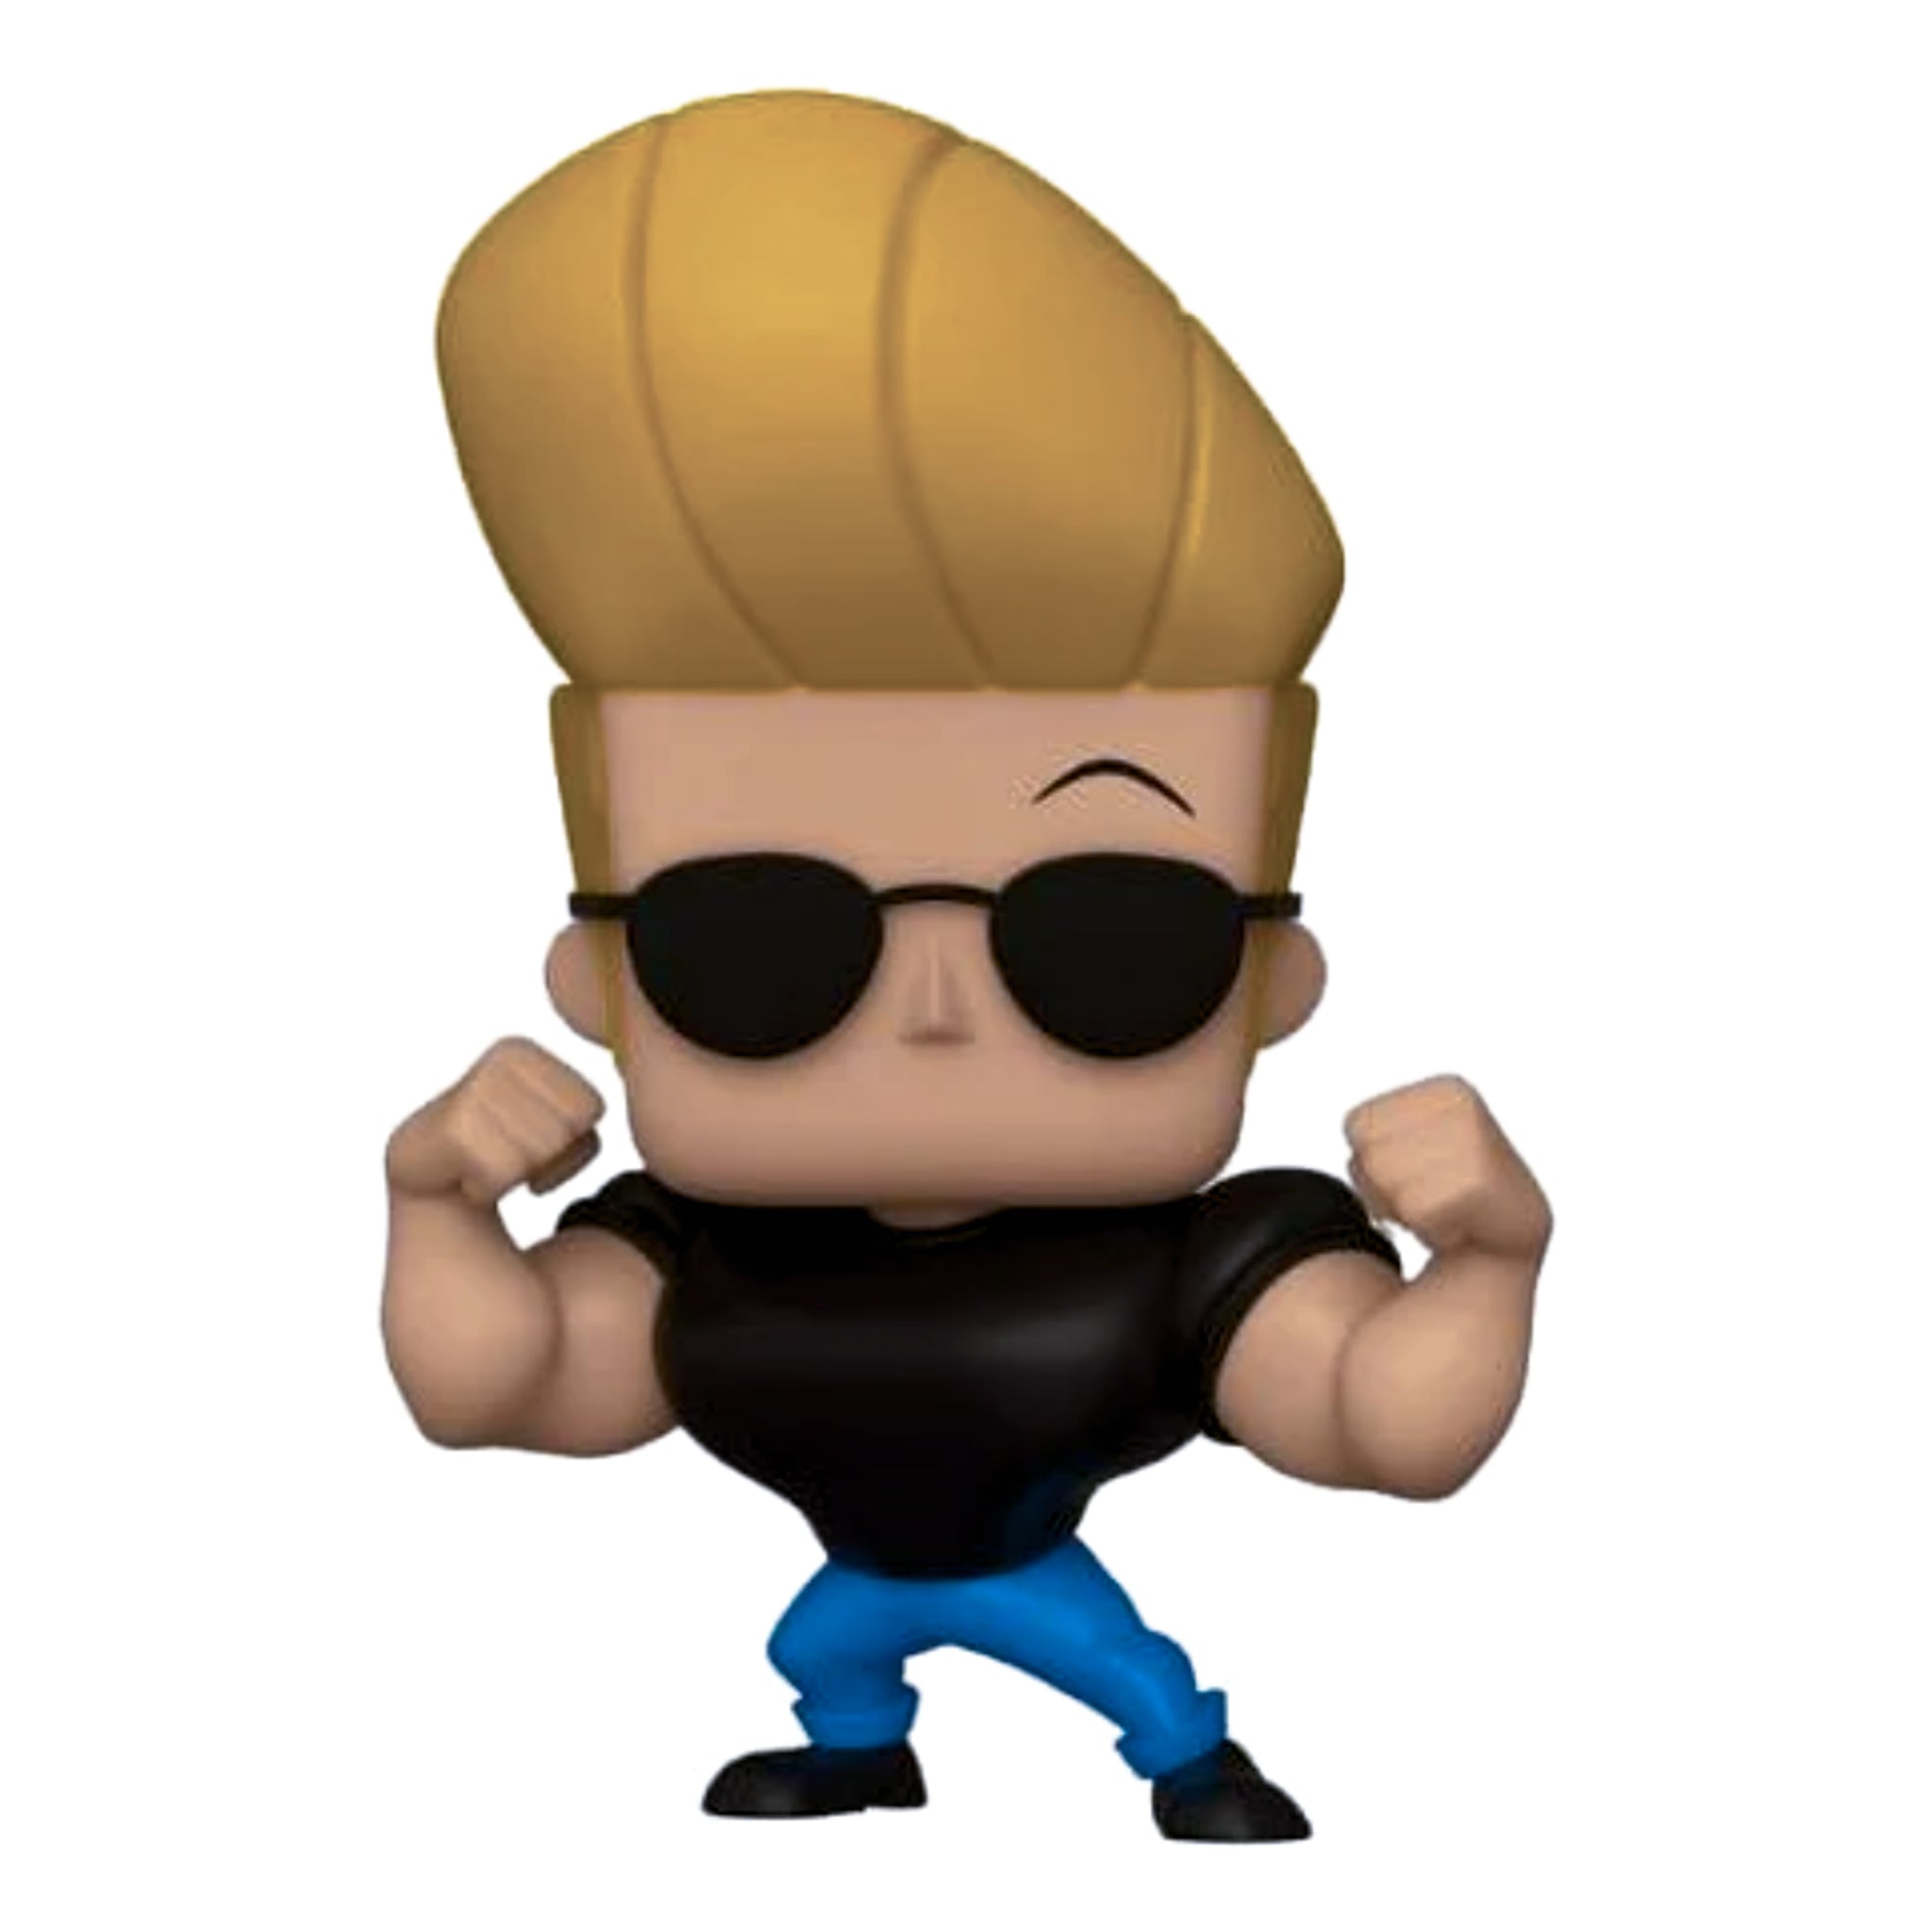 Johnny Bravo "Signed by  Jeff Bennett " JSA CERTIFIED SIGNED Funko Pop! FUNO LIMITED EDITION